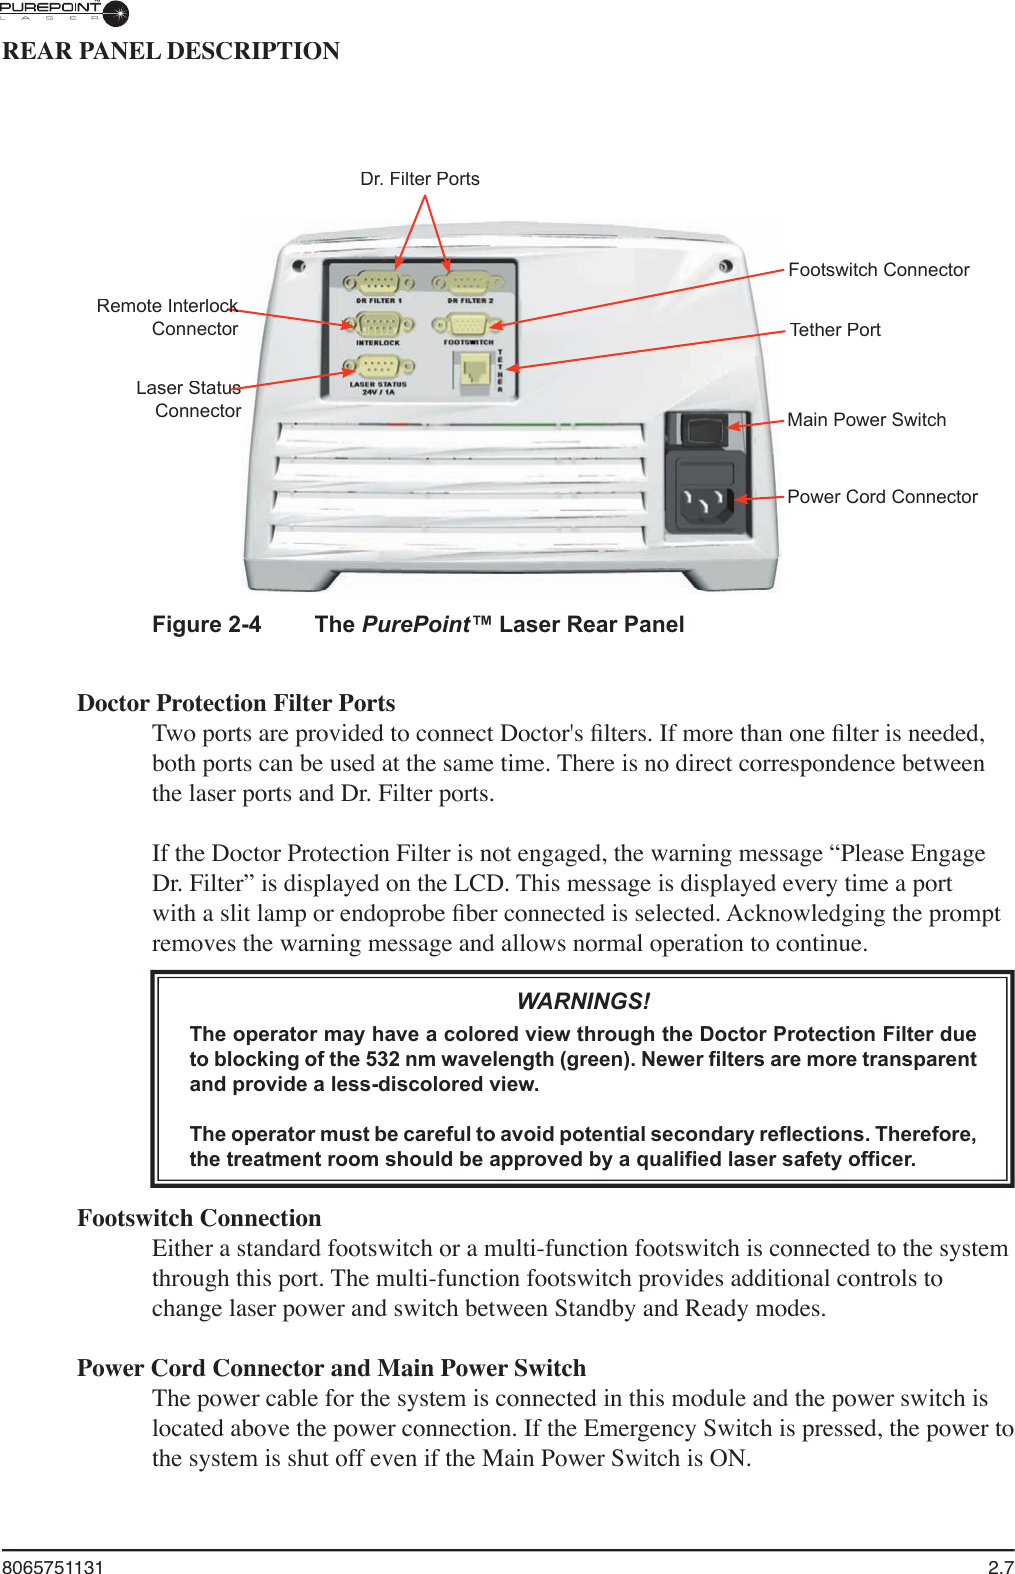 8065751131  2.7REAR PANEL DESCRIPTIONFigure 2-4  The PurePoint™ Laser Rear PanelDoctor Protection Filter PortsTwo ports are provided to connect Doctor&apos;s ﬁ lters. If more than one ﬁ lter is needed, both ports can be used at the same time. There is no direct correspondence between the laser ports and Dr. Filter ports.If the Doctor Protection Filter is not engaged, the warning message “Please Engage Dr. Filter” is displayed on the LCD. This message is displayed every time a port with a slit lamp or endoprobe ﬁ ber connected is selected. Acknowledging the prompt removes the warning message and allows normal operation to continue.WARNINGS!The operator may have a colored view through the Doctor Protection Filter due to blocking of the 532 nm wavelength (green). Newer filters are more transparent and provide a less-discolored view.The operator must be careful to avoid potential secondary reflections. Therefore, the treatment room should be approved by a qualified laser safety officer.Footswitch ConnectionEither a standard footswitch or a multi-function footswitch is connected to the system through this port. The multi-function footswitch provides additional controls to change laser power and switch between Standby and Ready modes.Power Cord Connector and Main Power SwitchThe power cable for the system is connected in this module and the power switch is located above the power connection. If the Emergency Switch is pressed, the power to the system is shut off even if the Main Power Switch is ON. Dr. Filter PortsRemote Interlock Remote Interlock ConnectorLaser StatusConnectorConnectorFootswitch ConnectorTether PortMain Power SwitchPower Cord Connector